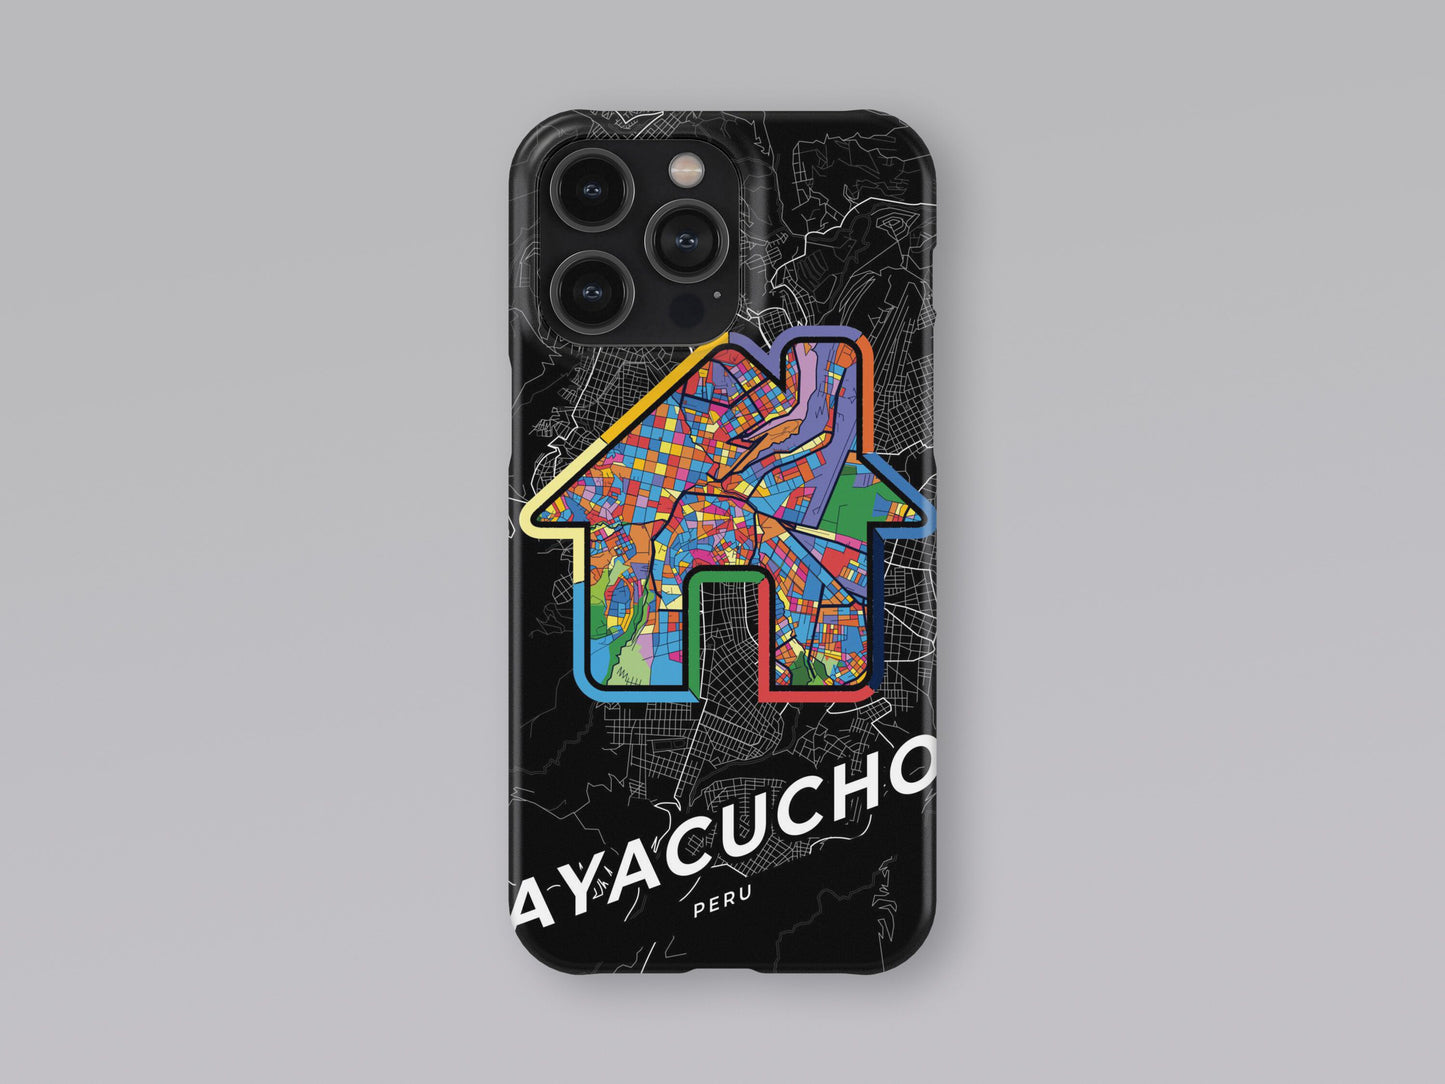 Ayacucho Peru slim phone case with colorful icon. Birthday, wedding or housewarming gift. Couple match cases. 3